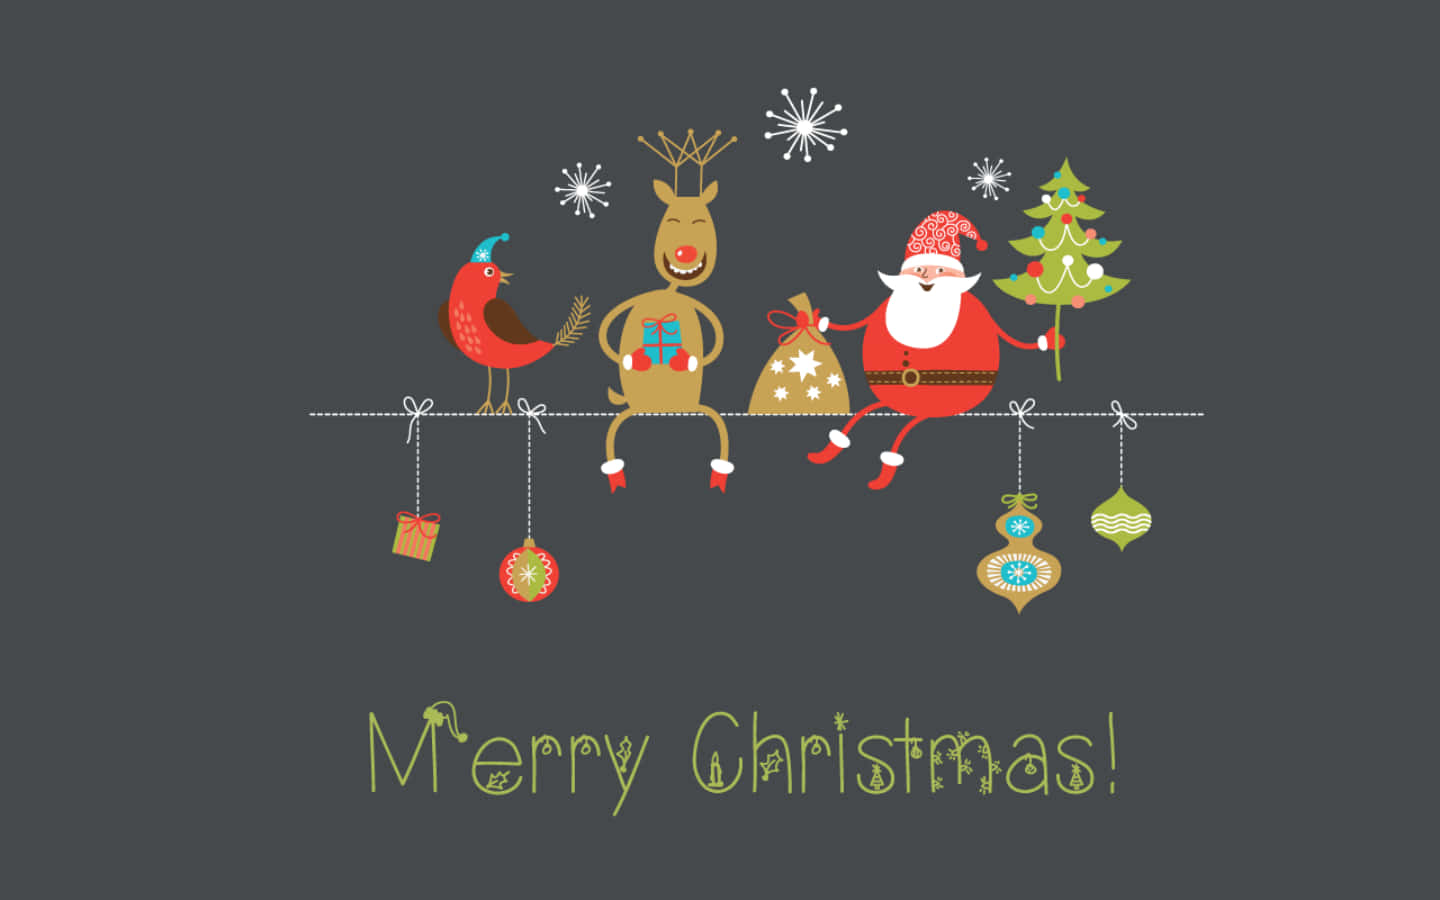 A Christmas Card With Santa And Reindeer On A Gray Background Wallpaper